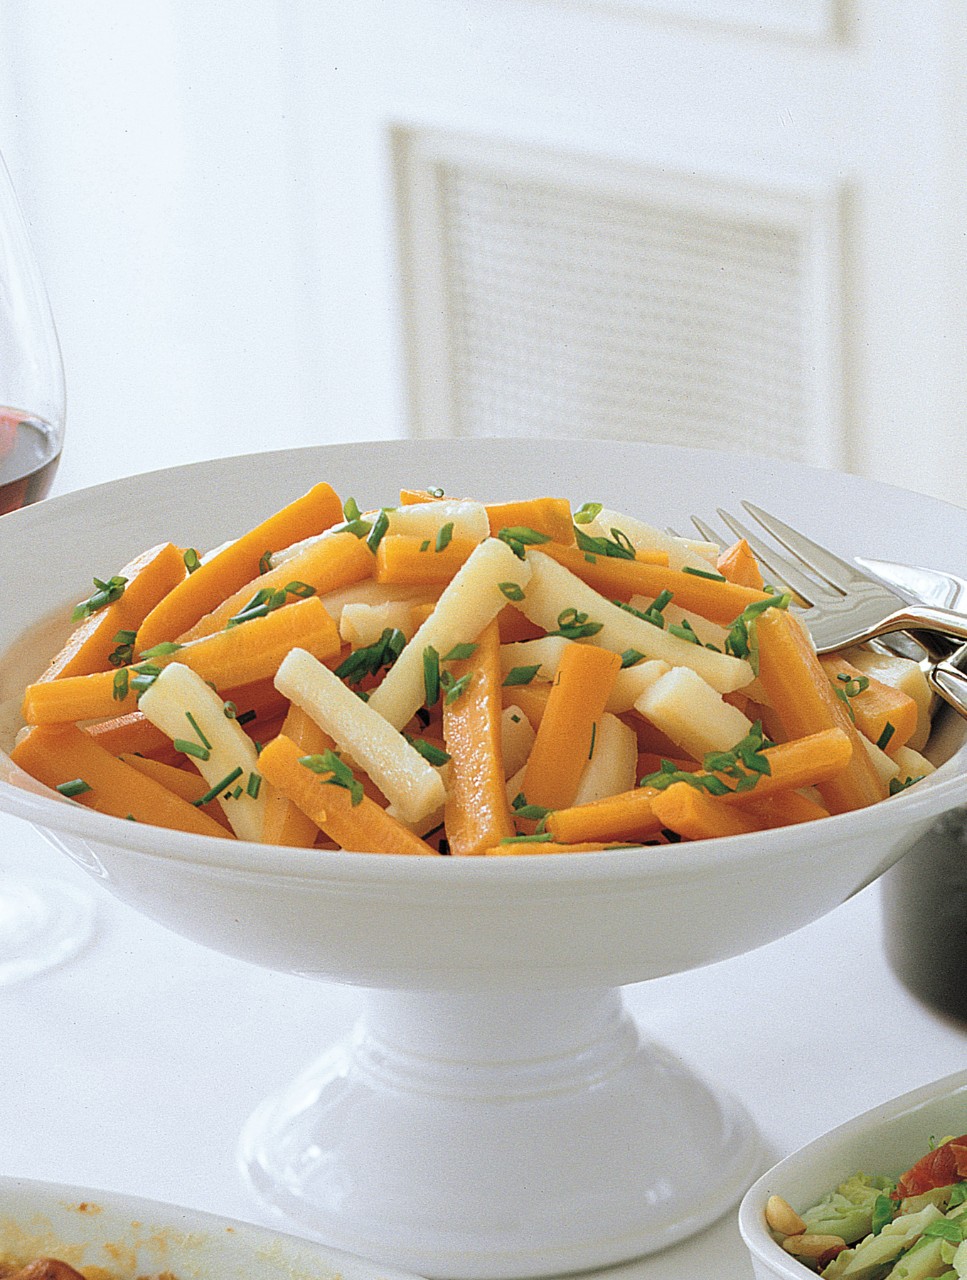 Glazed Carrots and Parsnips with Chives